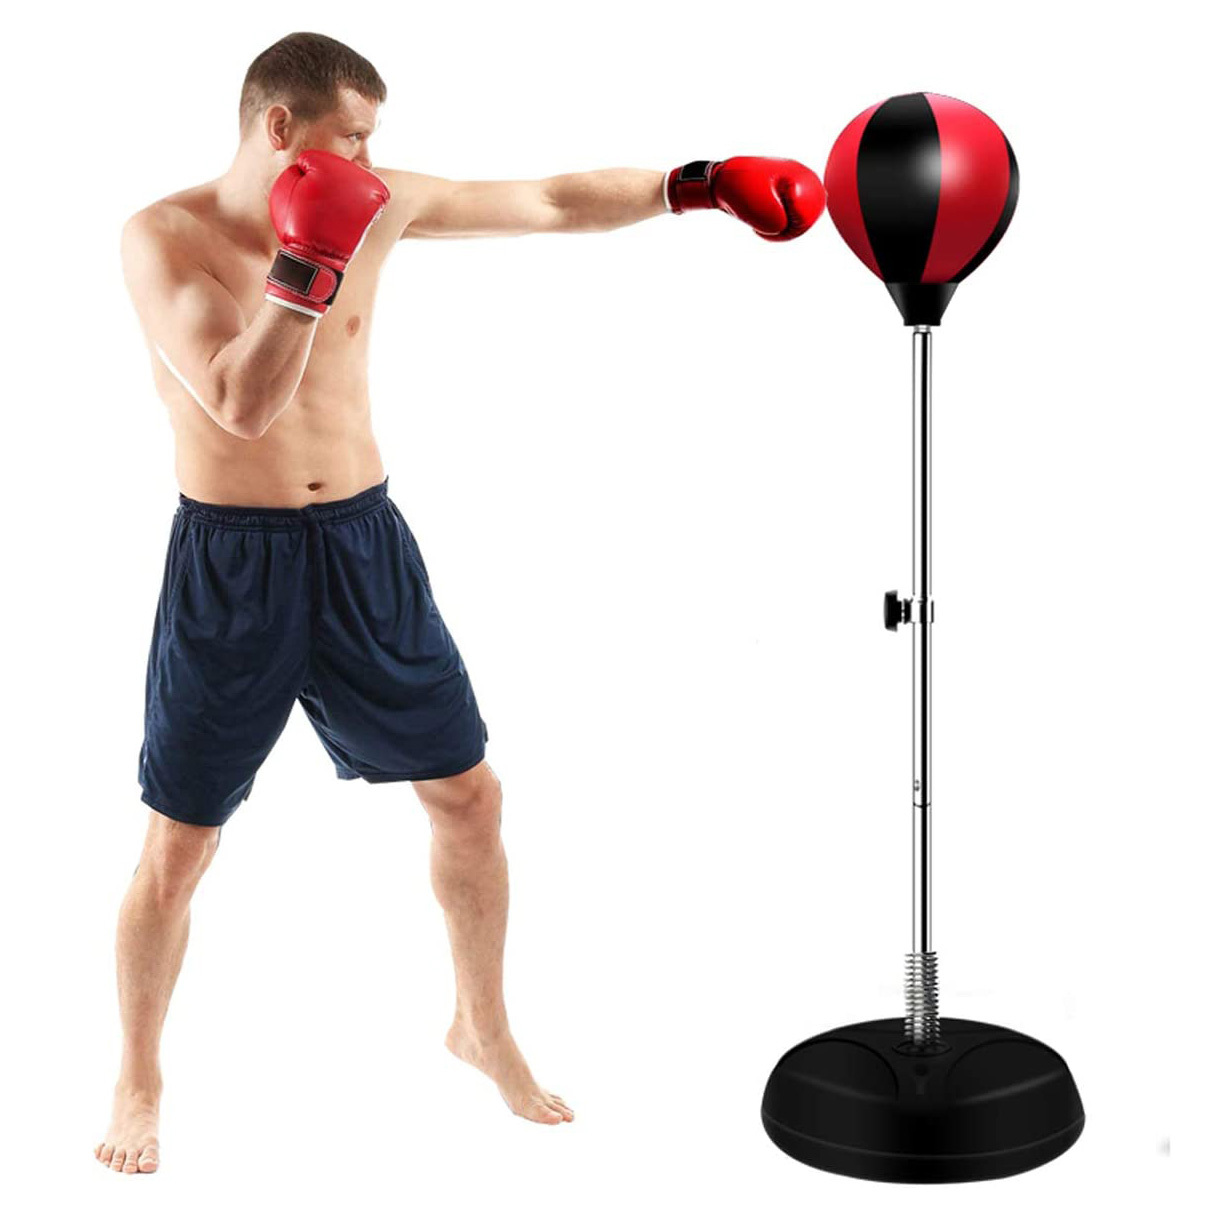 TOBY'S PUNCHING BAG REVIEW SAWDUST - YouTube